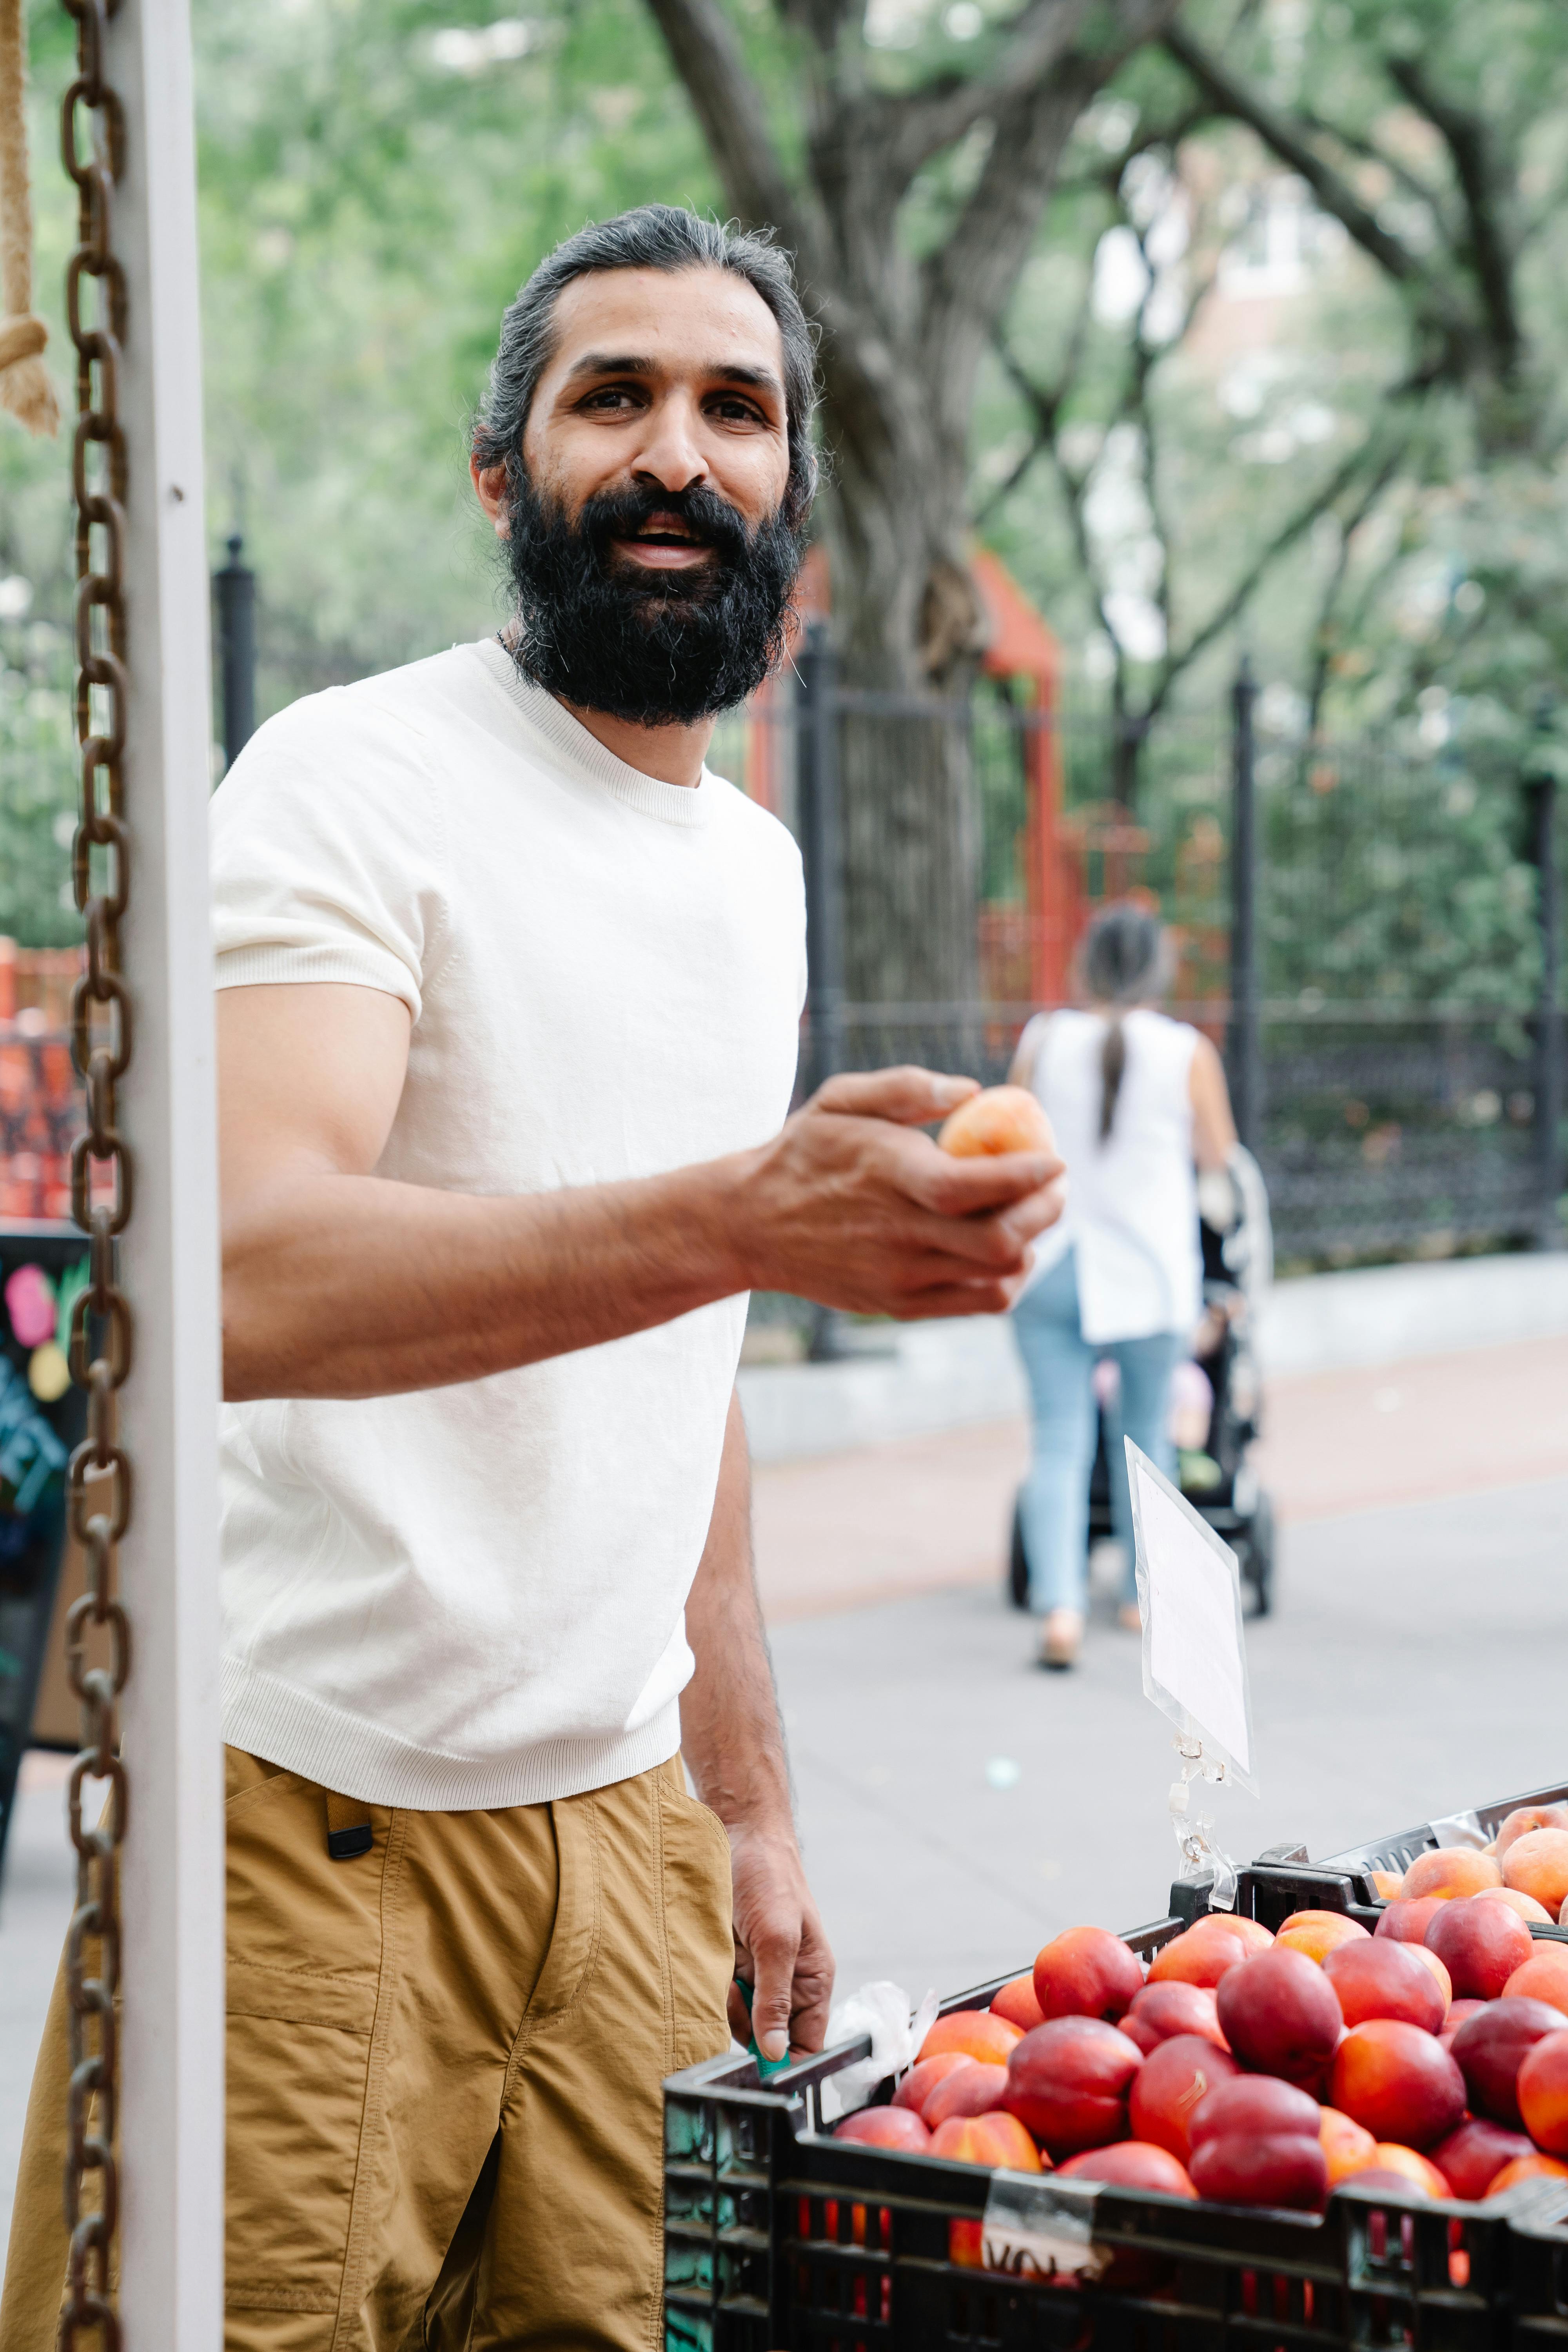 man with beard holding fruit in hand